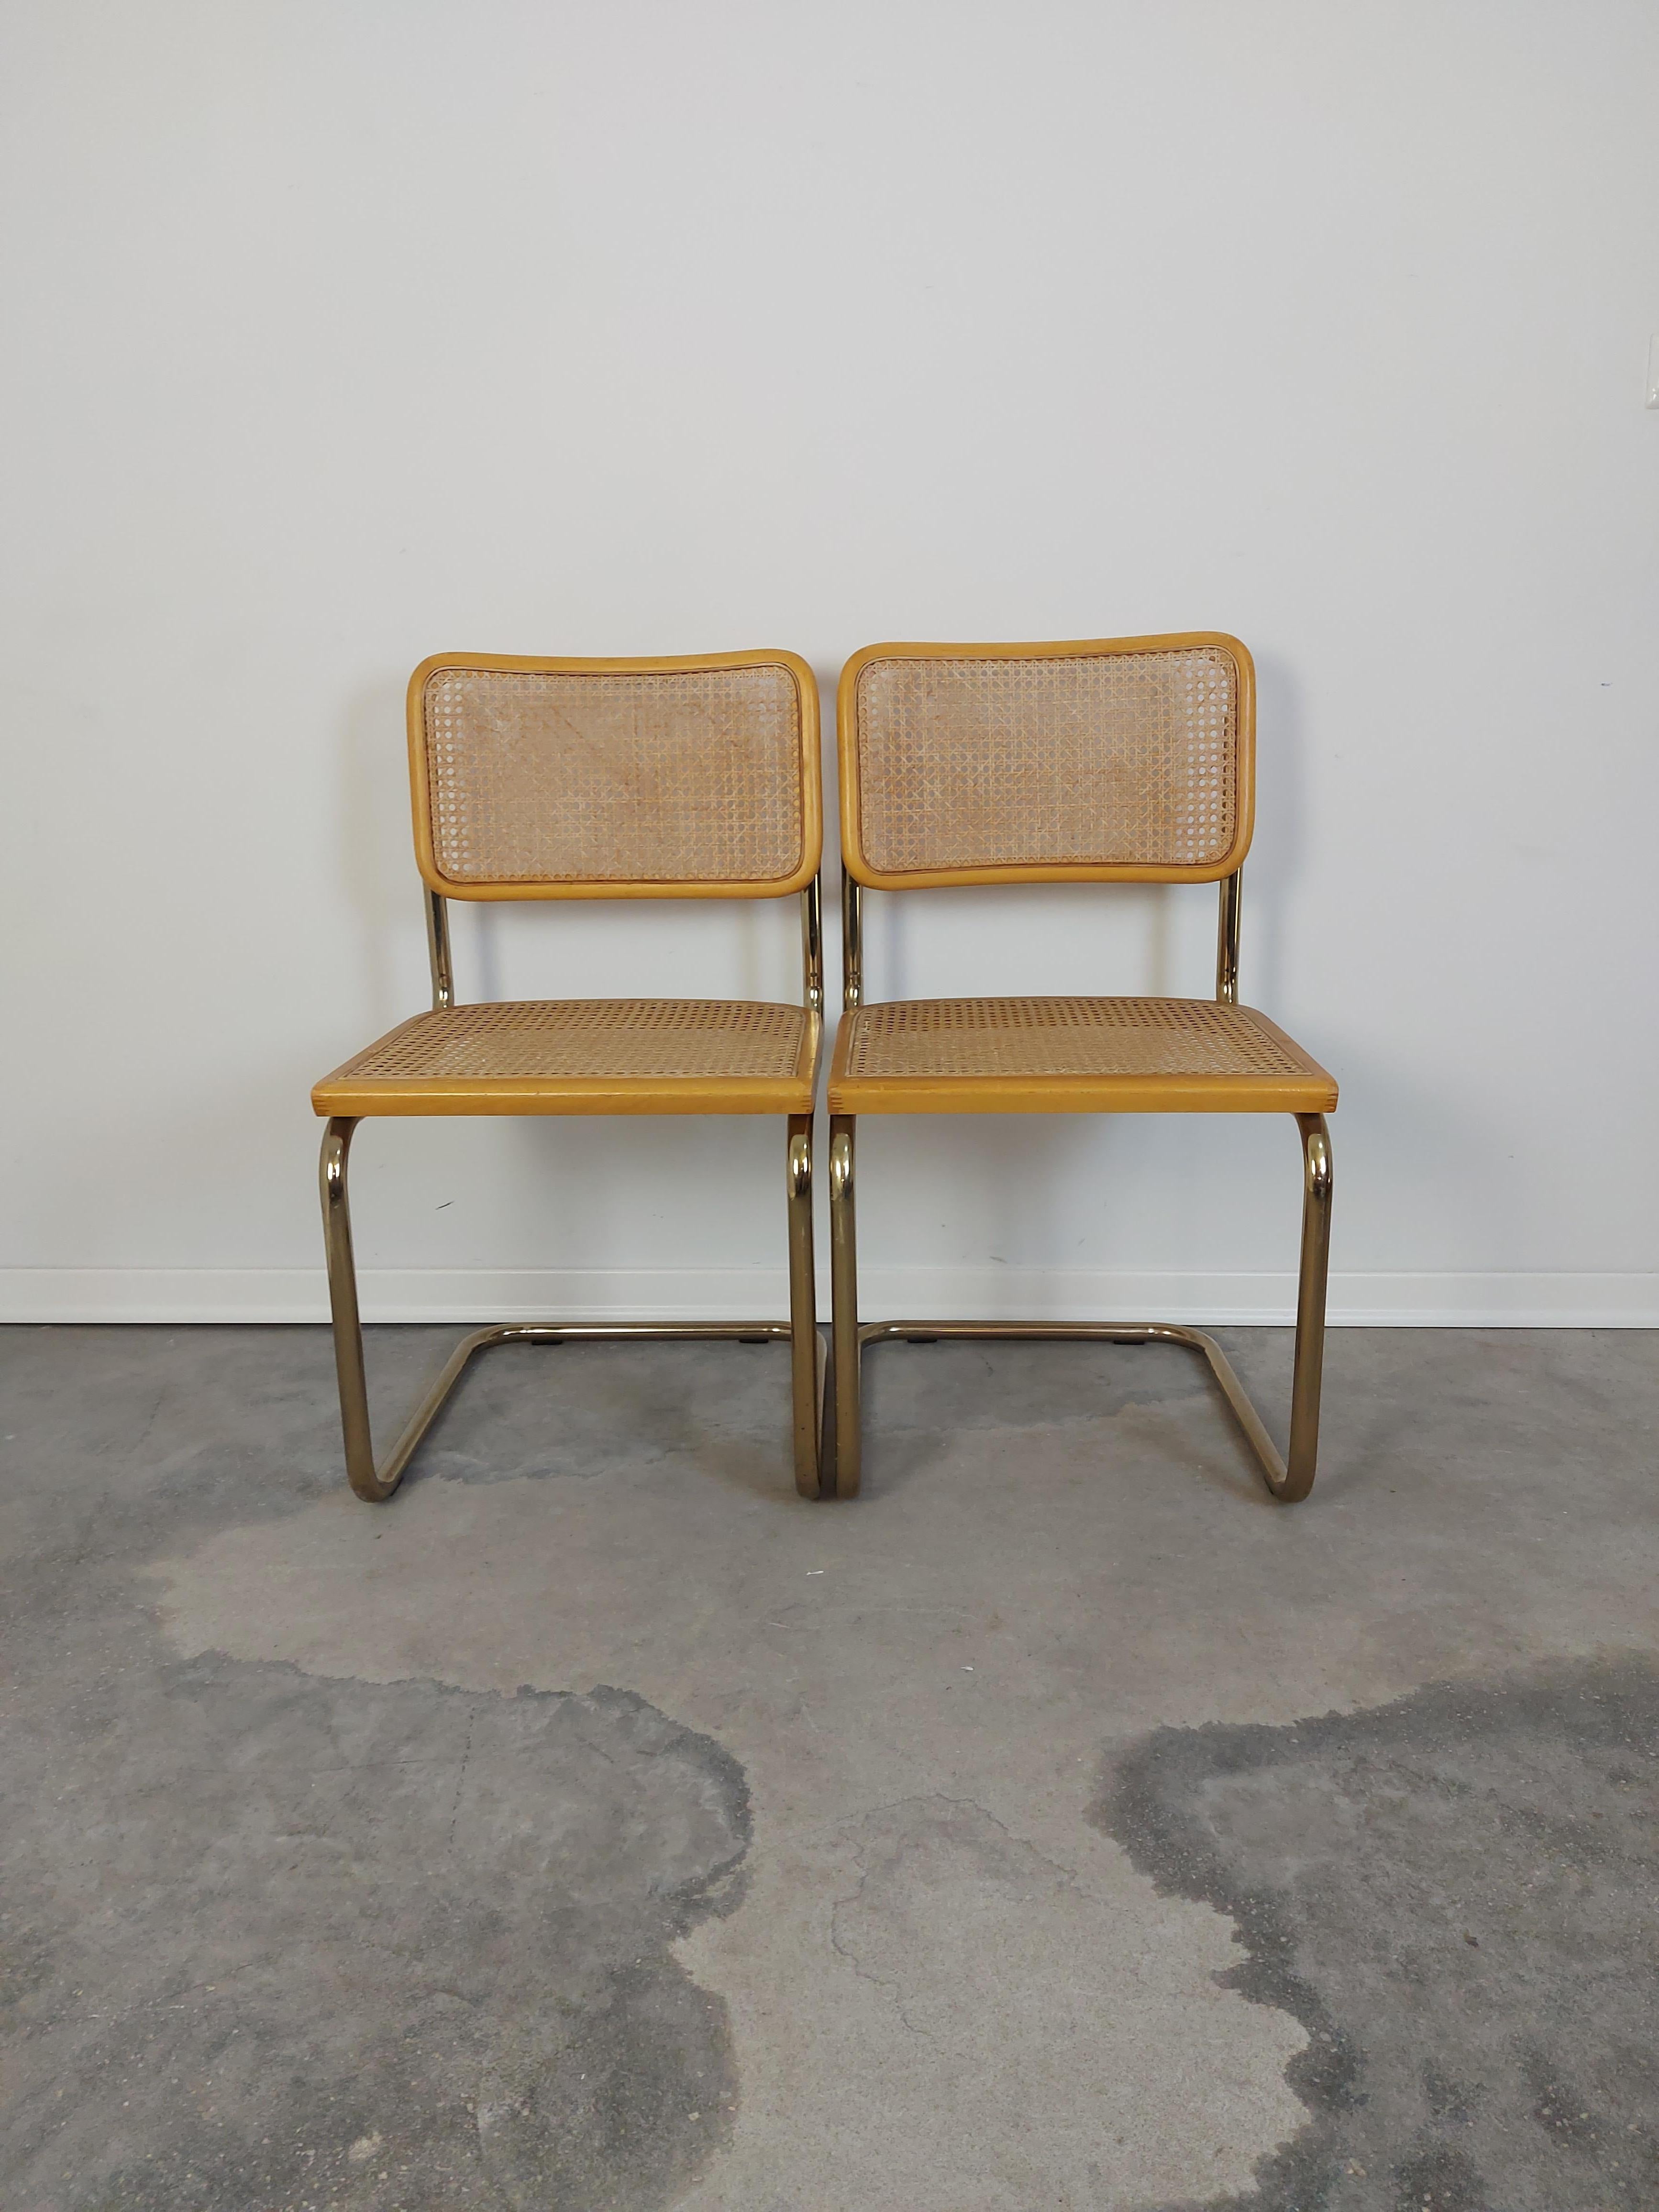 Mid-Century Modern CESCA Chair, 1980s, Pair Design Classic with Gilded Frame